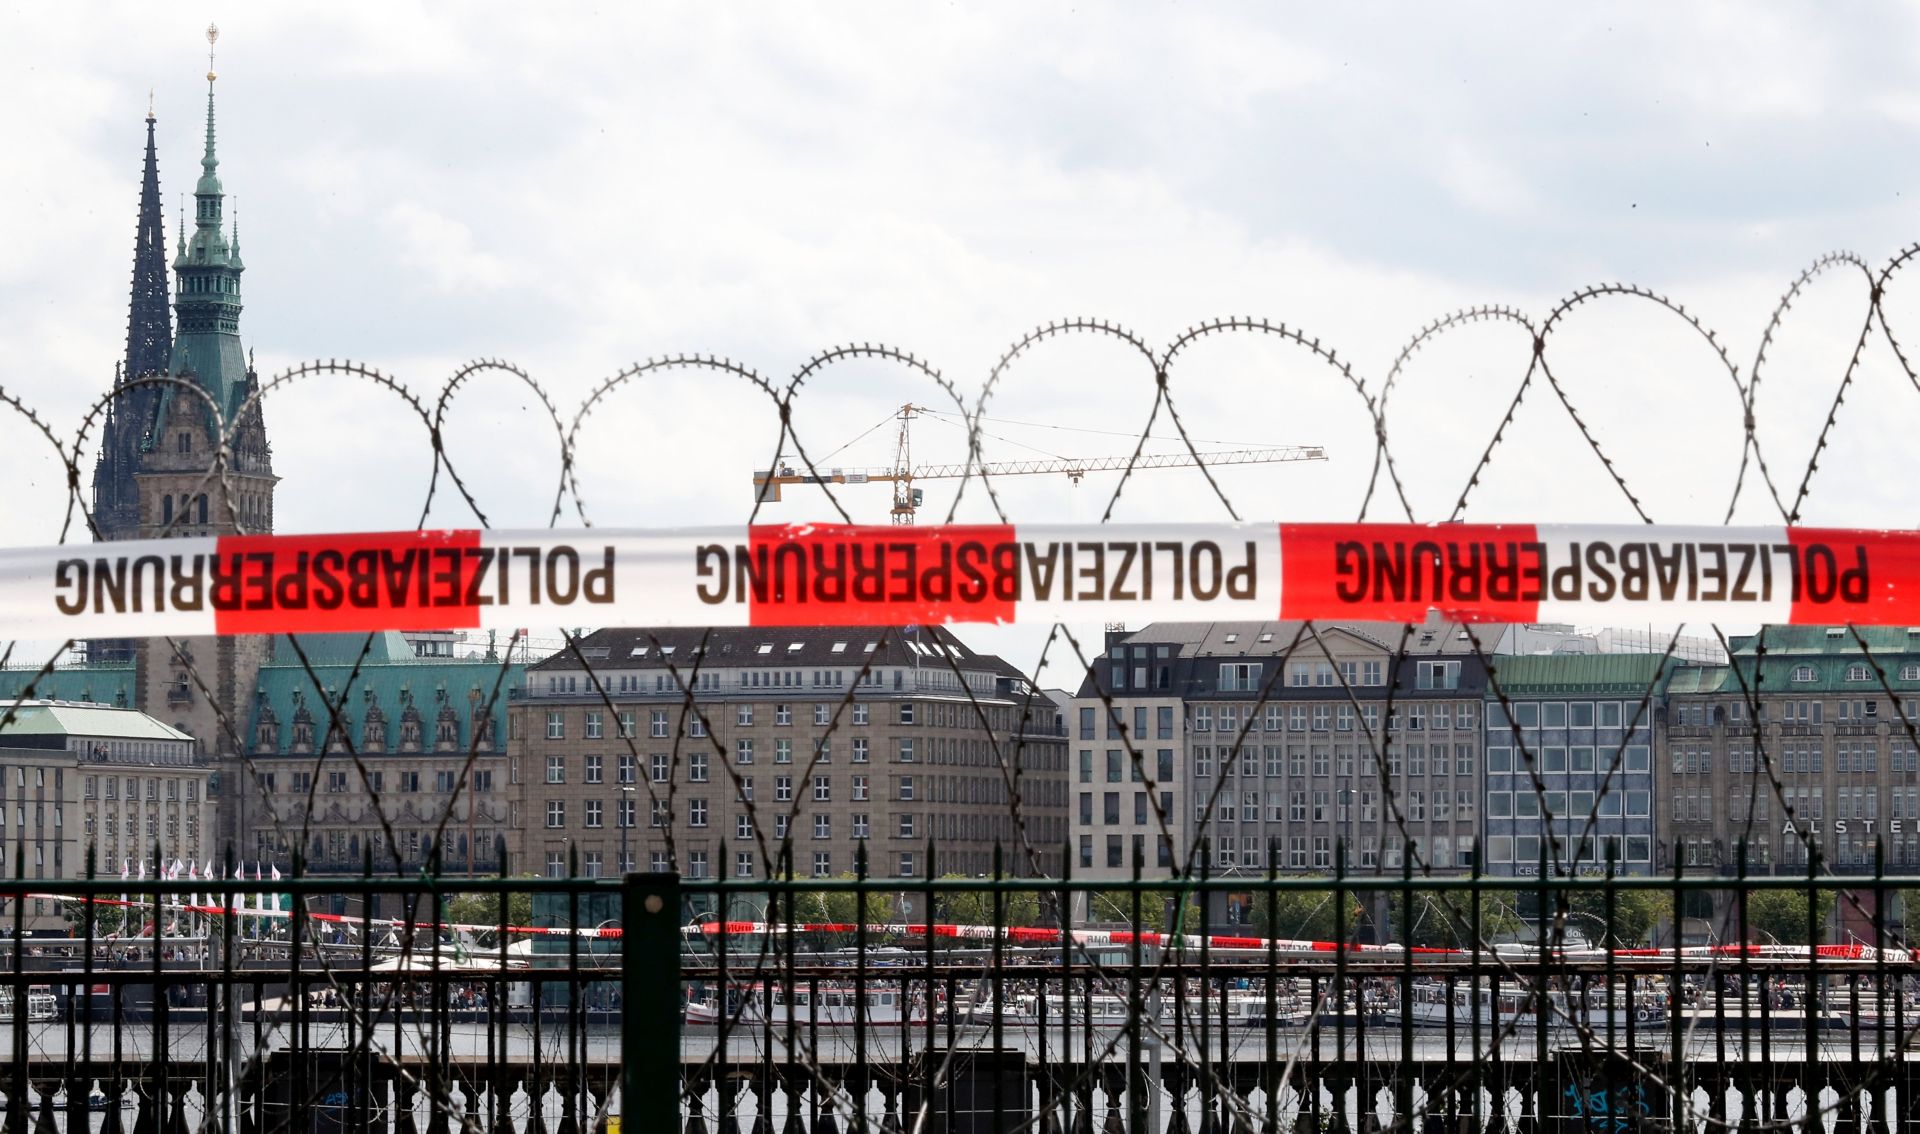 epa06063717 A barbed wire fence installed to prevent possible protesters to access a railway line is backdropped by the City Hall of Hamburg, northern Germany, 03 July 2017. The G20 Summit (or G-20 or Group of Twenty) is an international forum for governments from 20 major economies. The summit is taking place in Hamburg from 07 to 08 July 2017.  EPA/FRIEDEMANN VOGEL